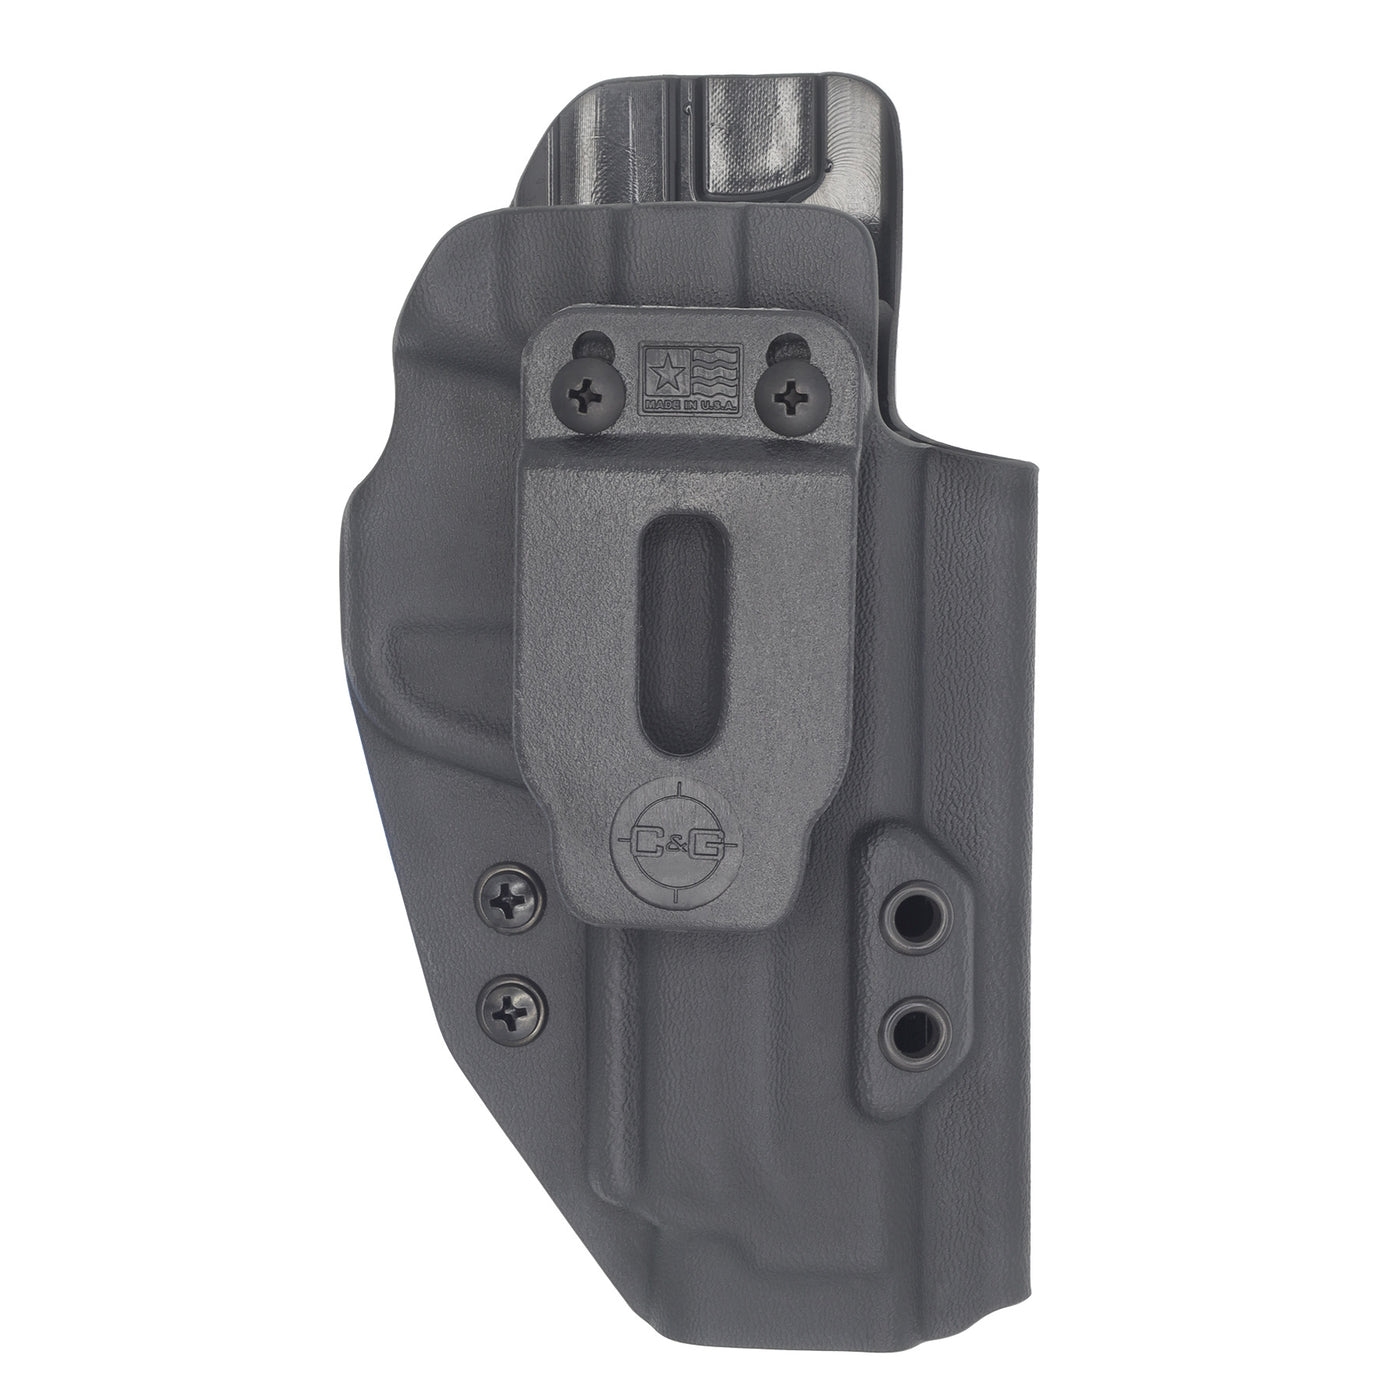 This is the C&G Holsters covert series inside the waistband (IWB) holster for the Smith & Wesson M&P 9/40 4.25"